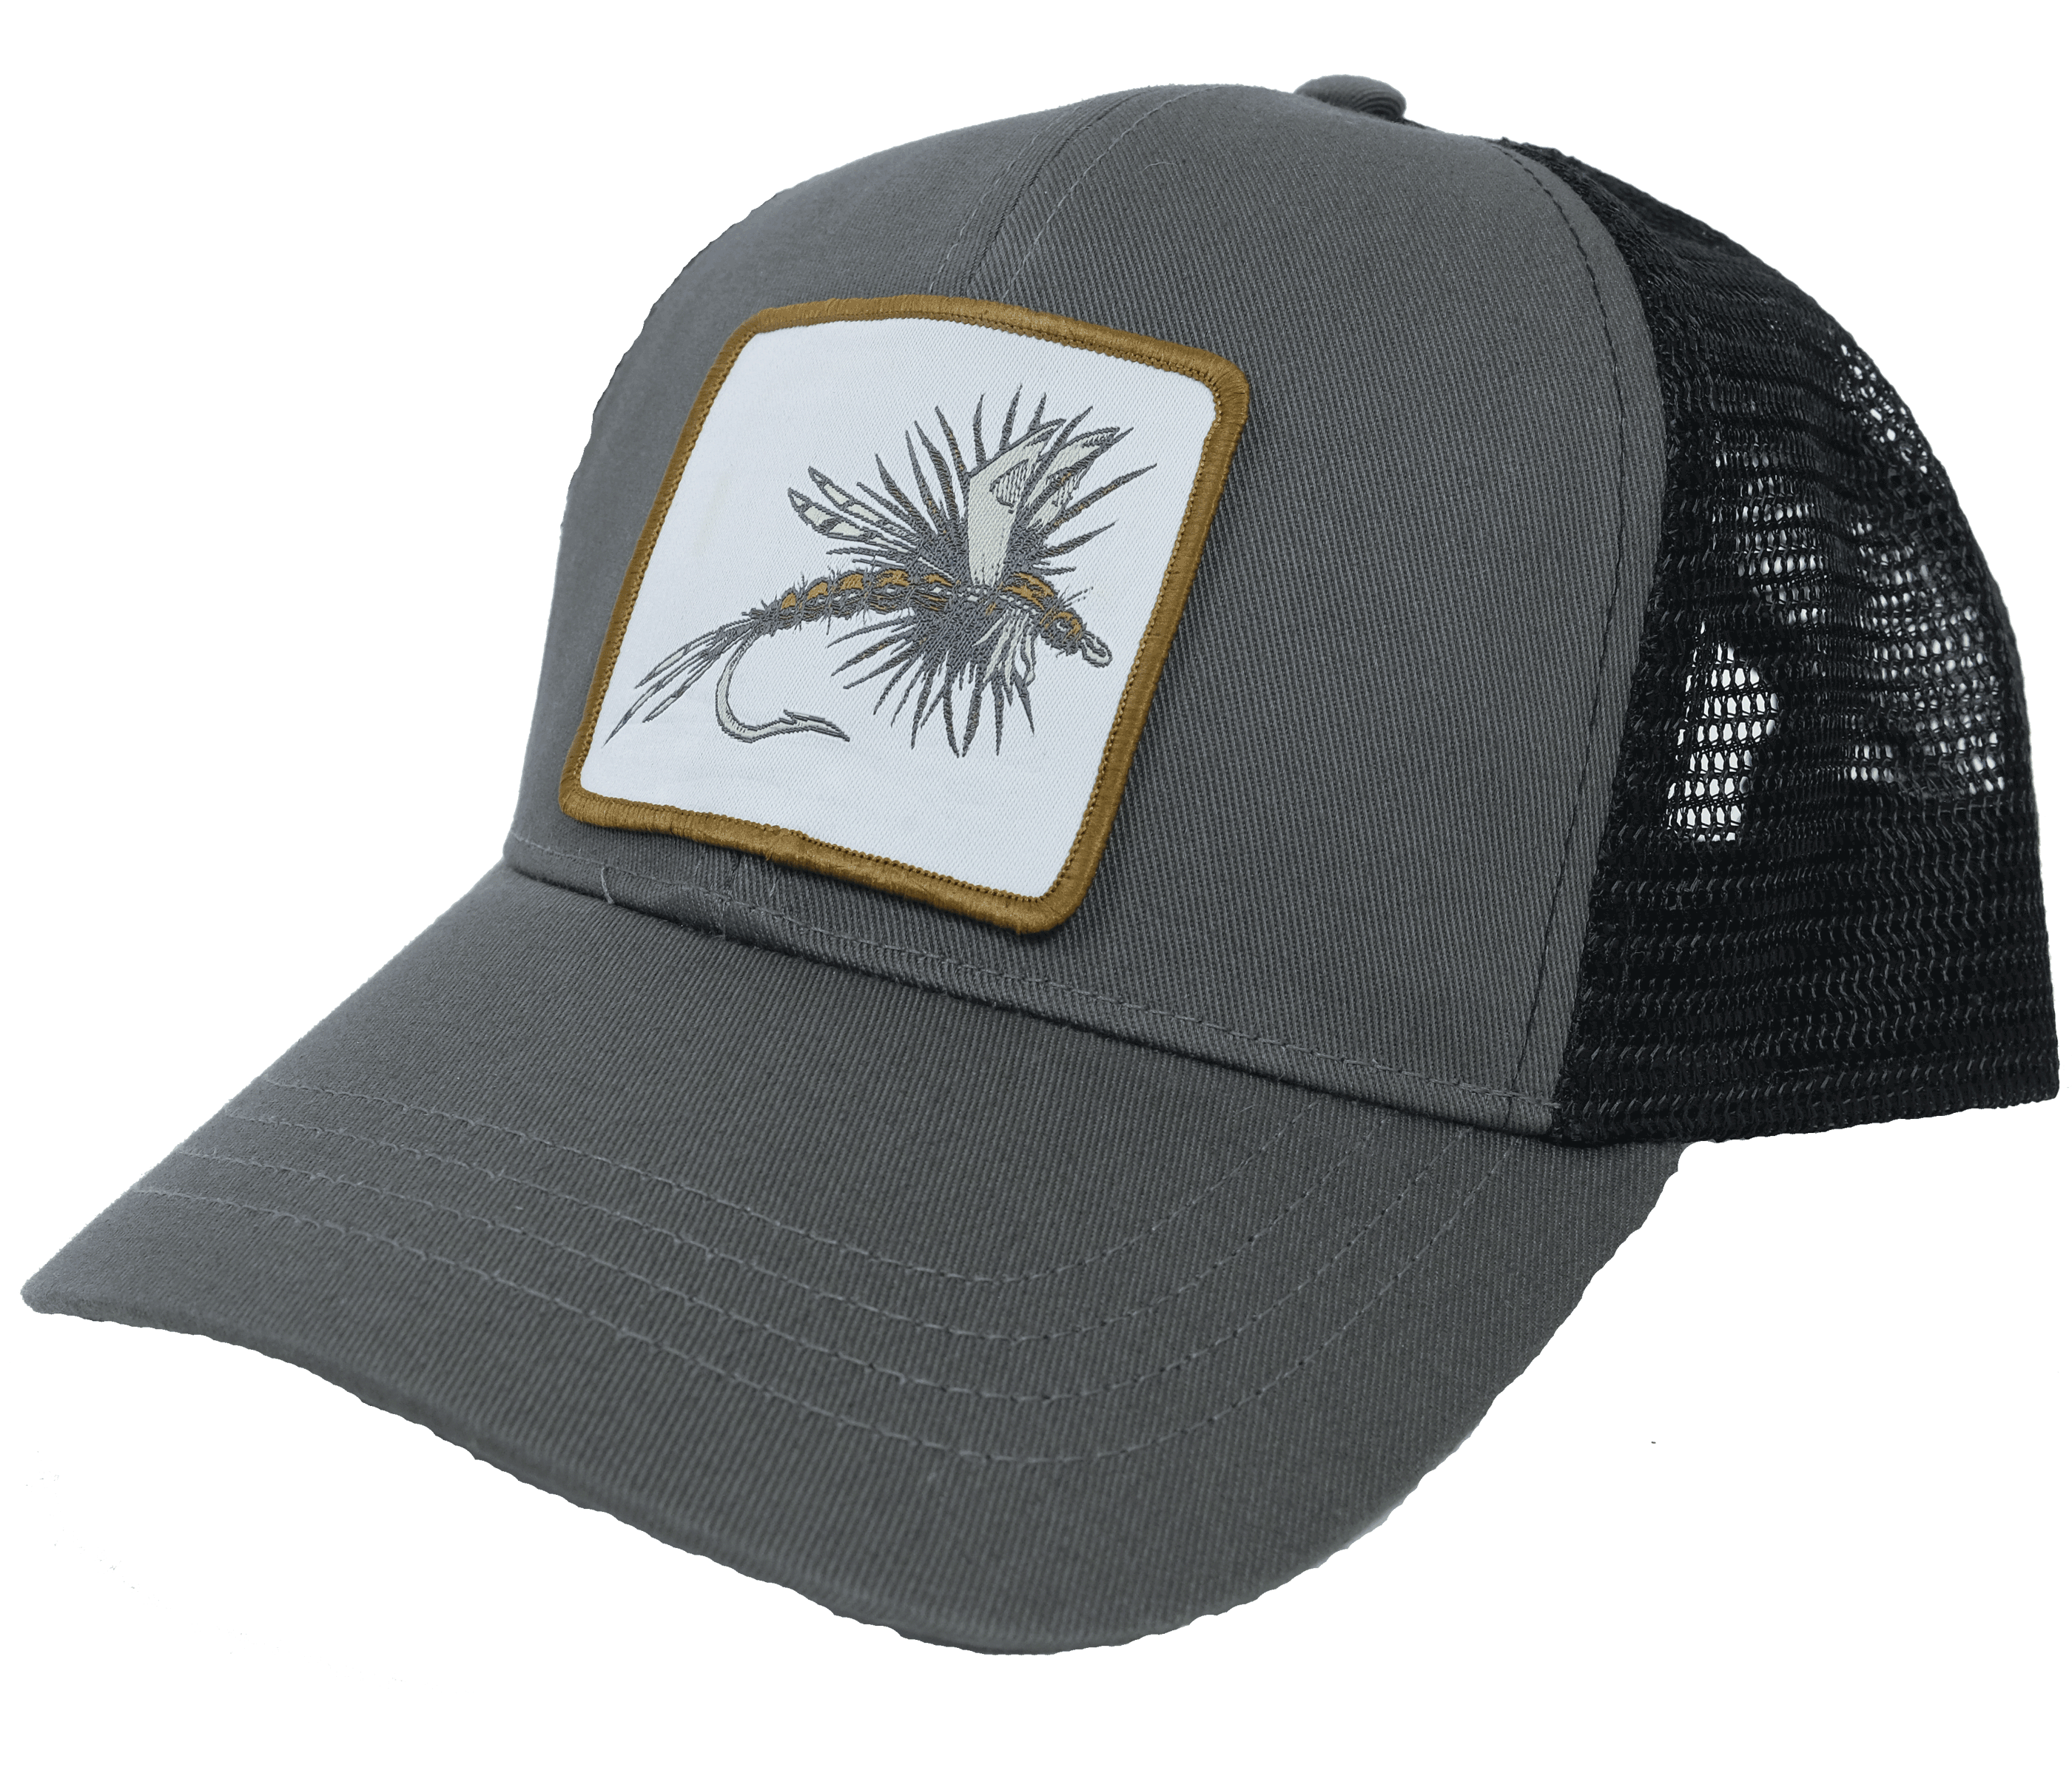 Dry fly trucker hat pacific fly fishing